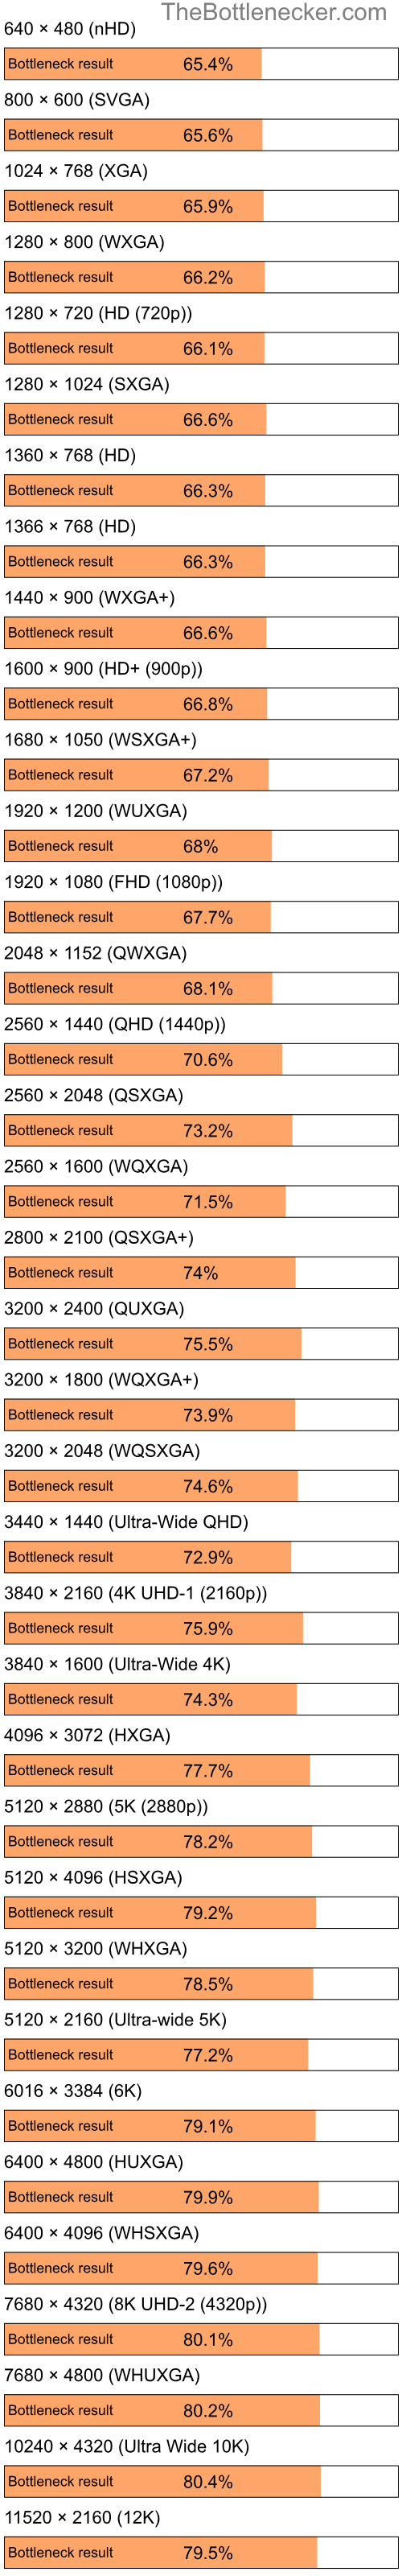 Bottleneck results by resolution for Intel Pentium 4 and NVIDIA GeForce Go 6800 in Graphic Card Intense Tasks